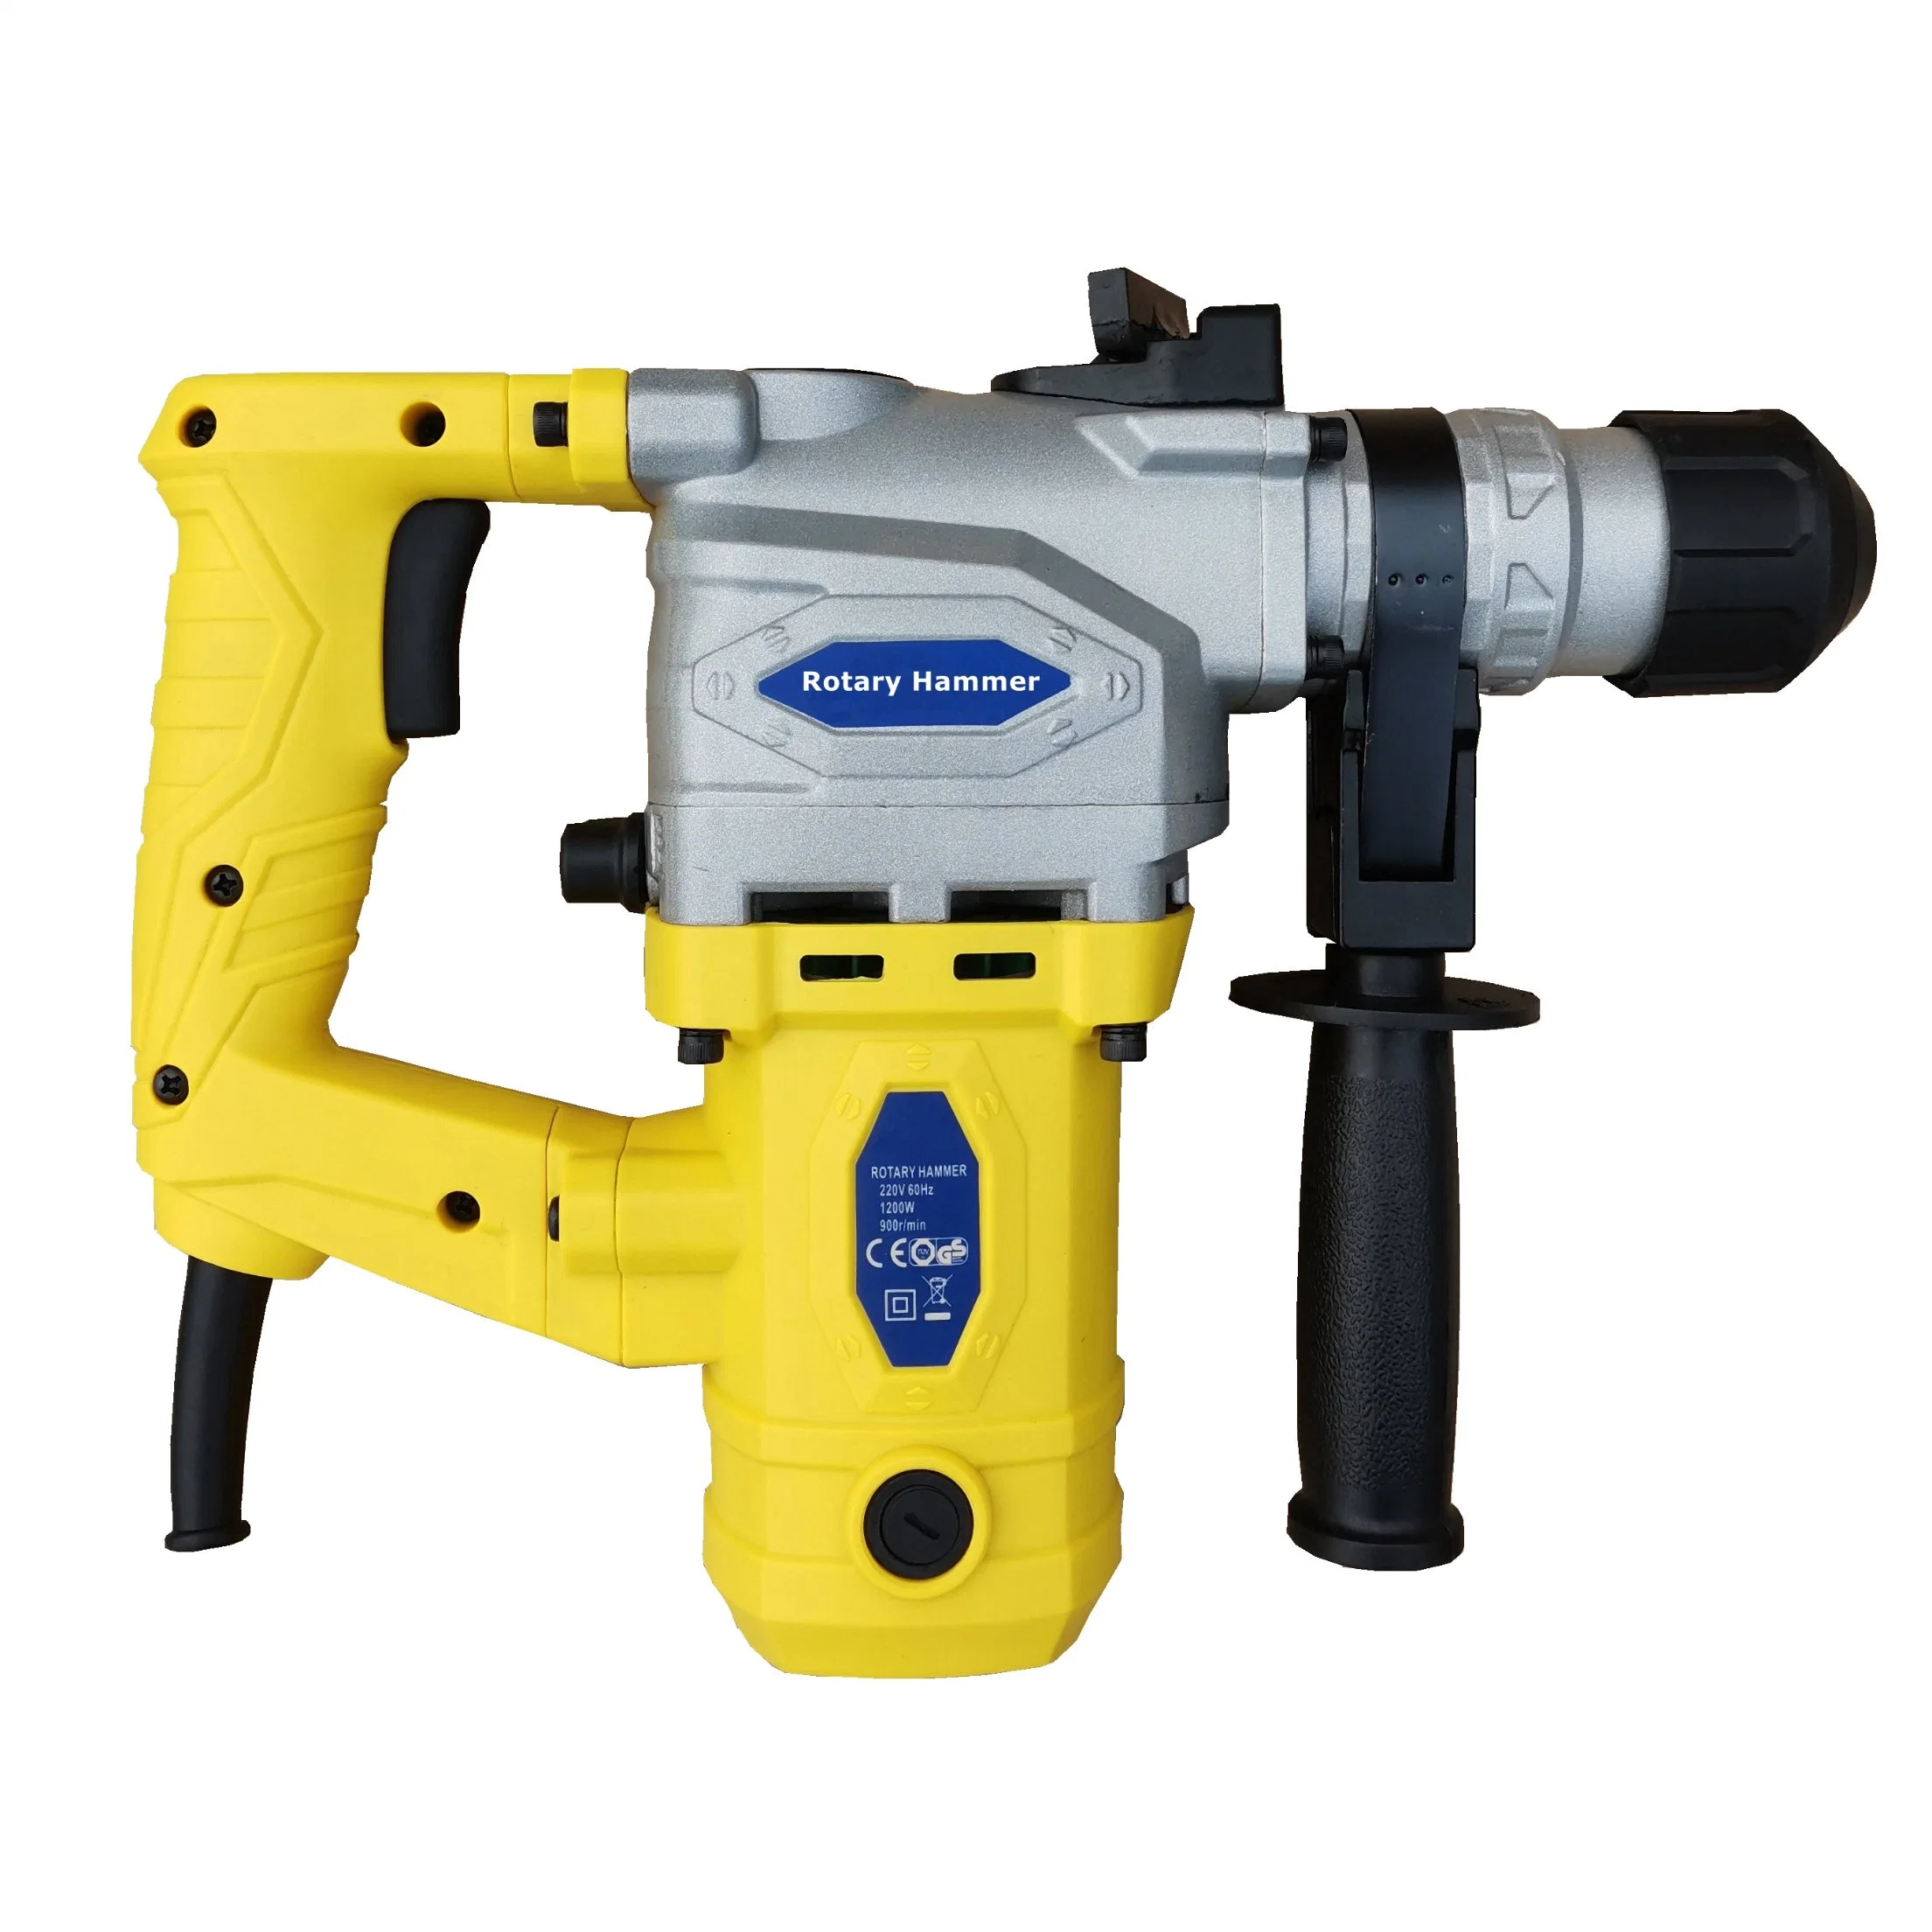 China Manufacturer Produced 900W 26mm Electric Rotary Hammer